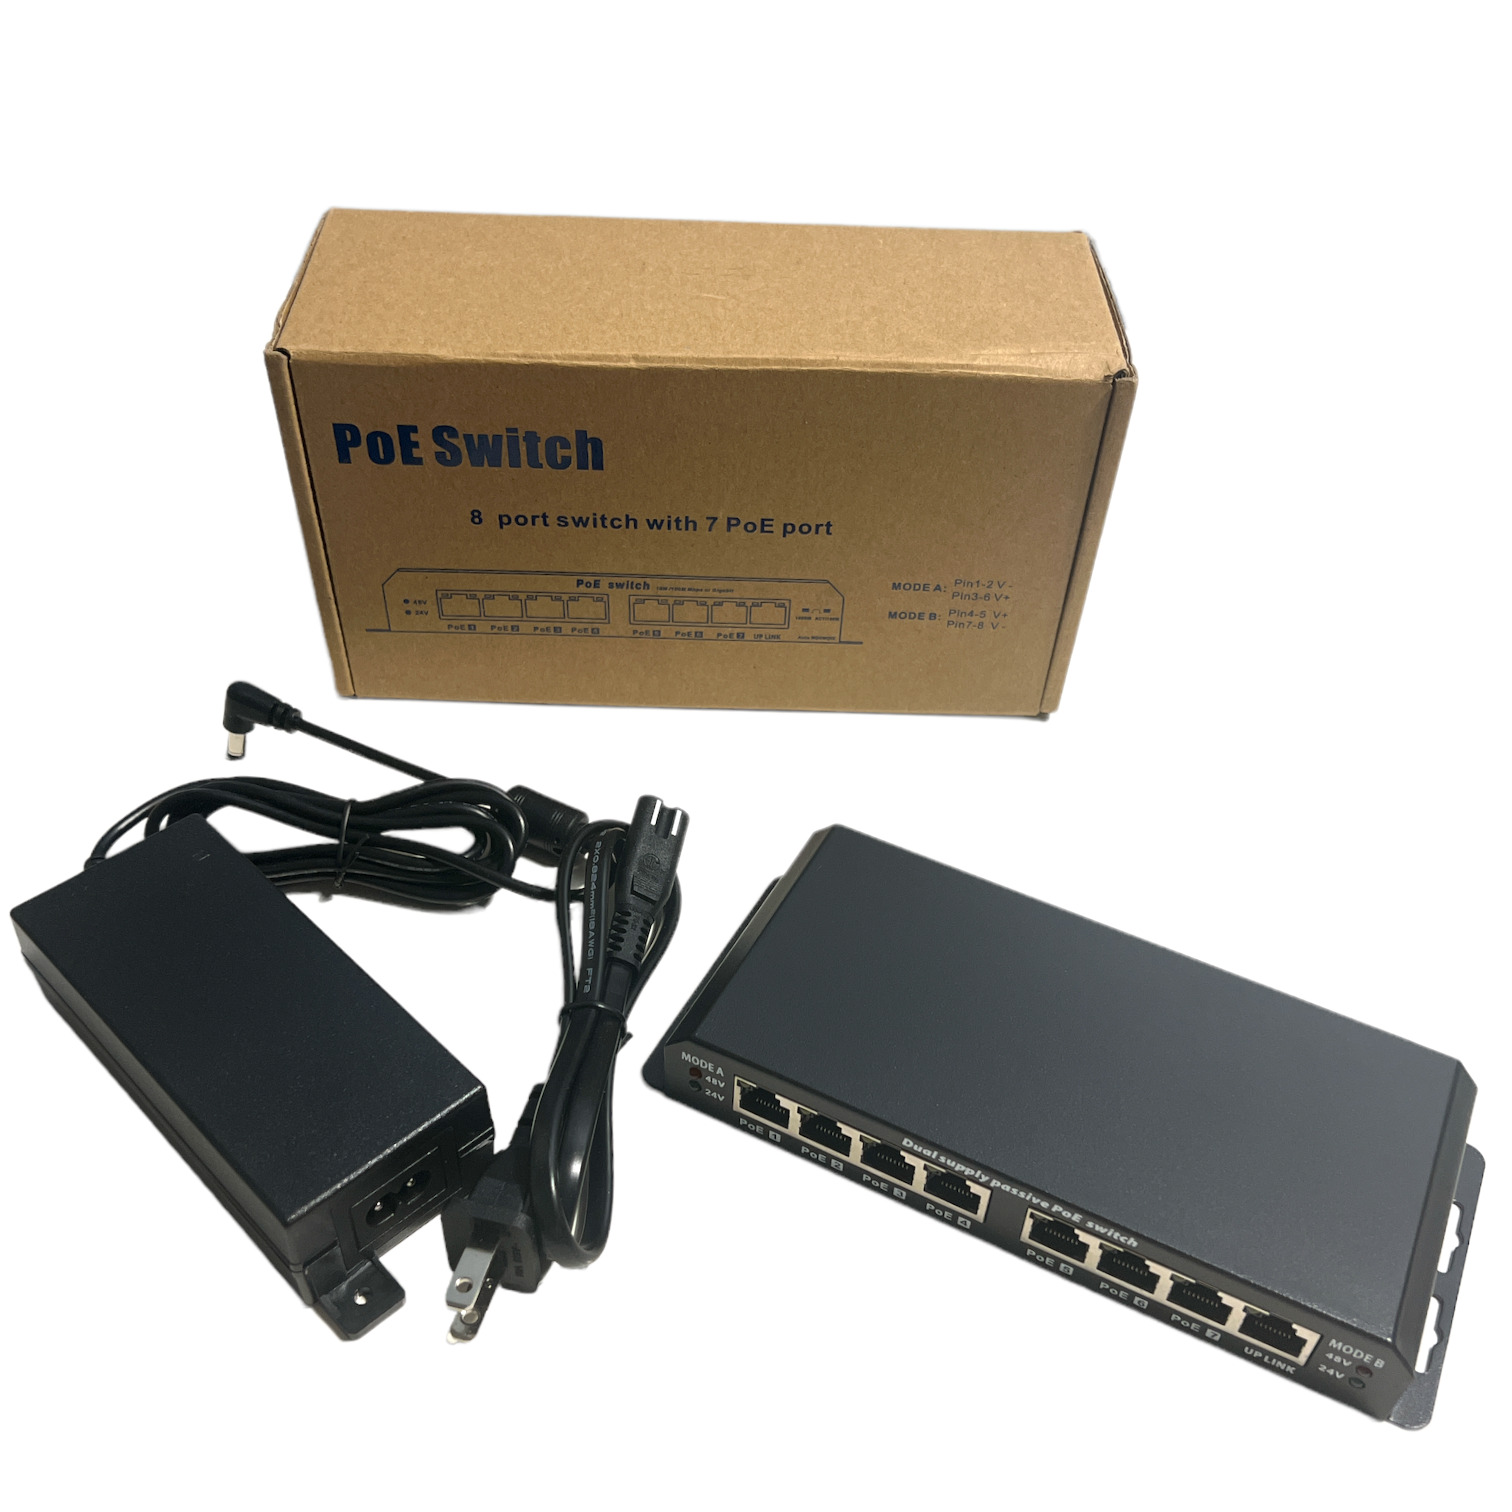 8-Port PoE Switch with 7 PoE Ports - Simplify Your Network Setup and Power